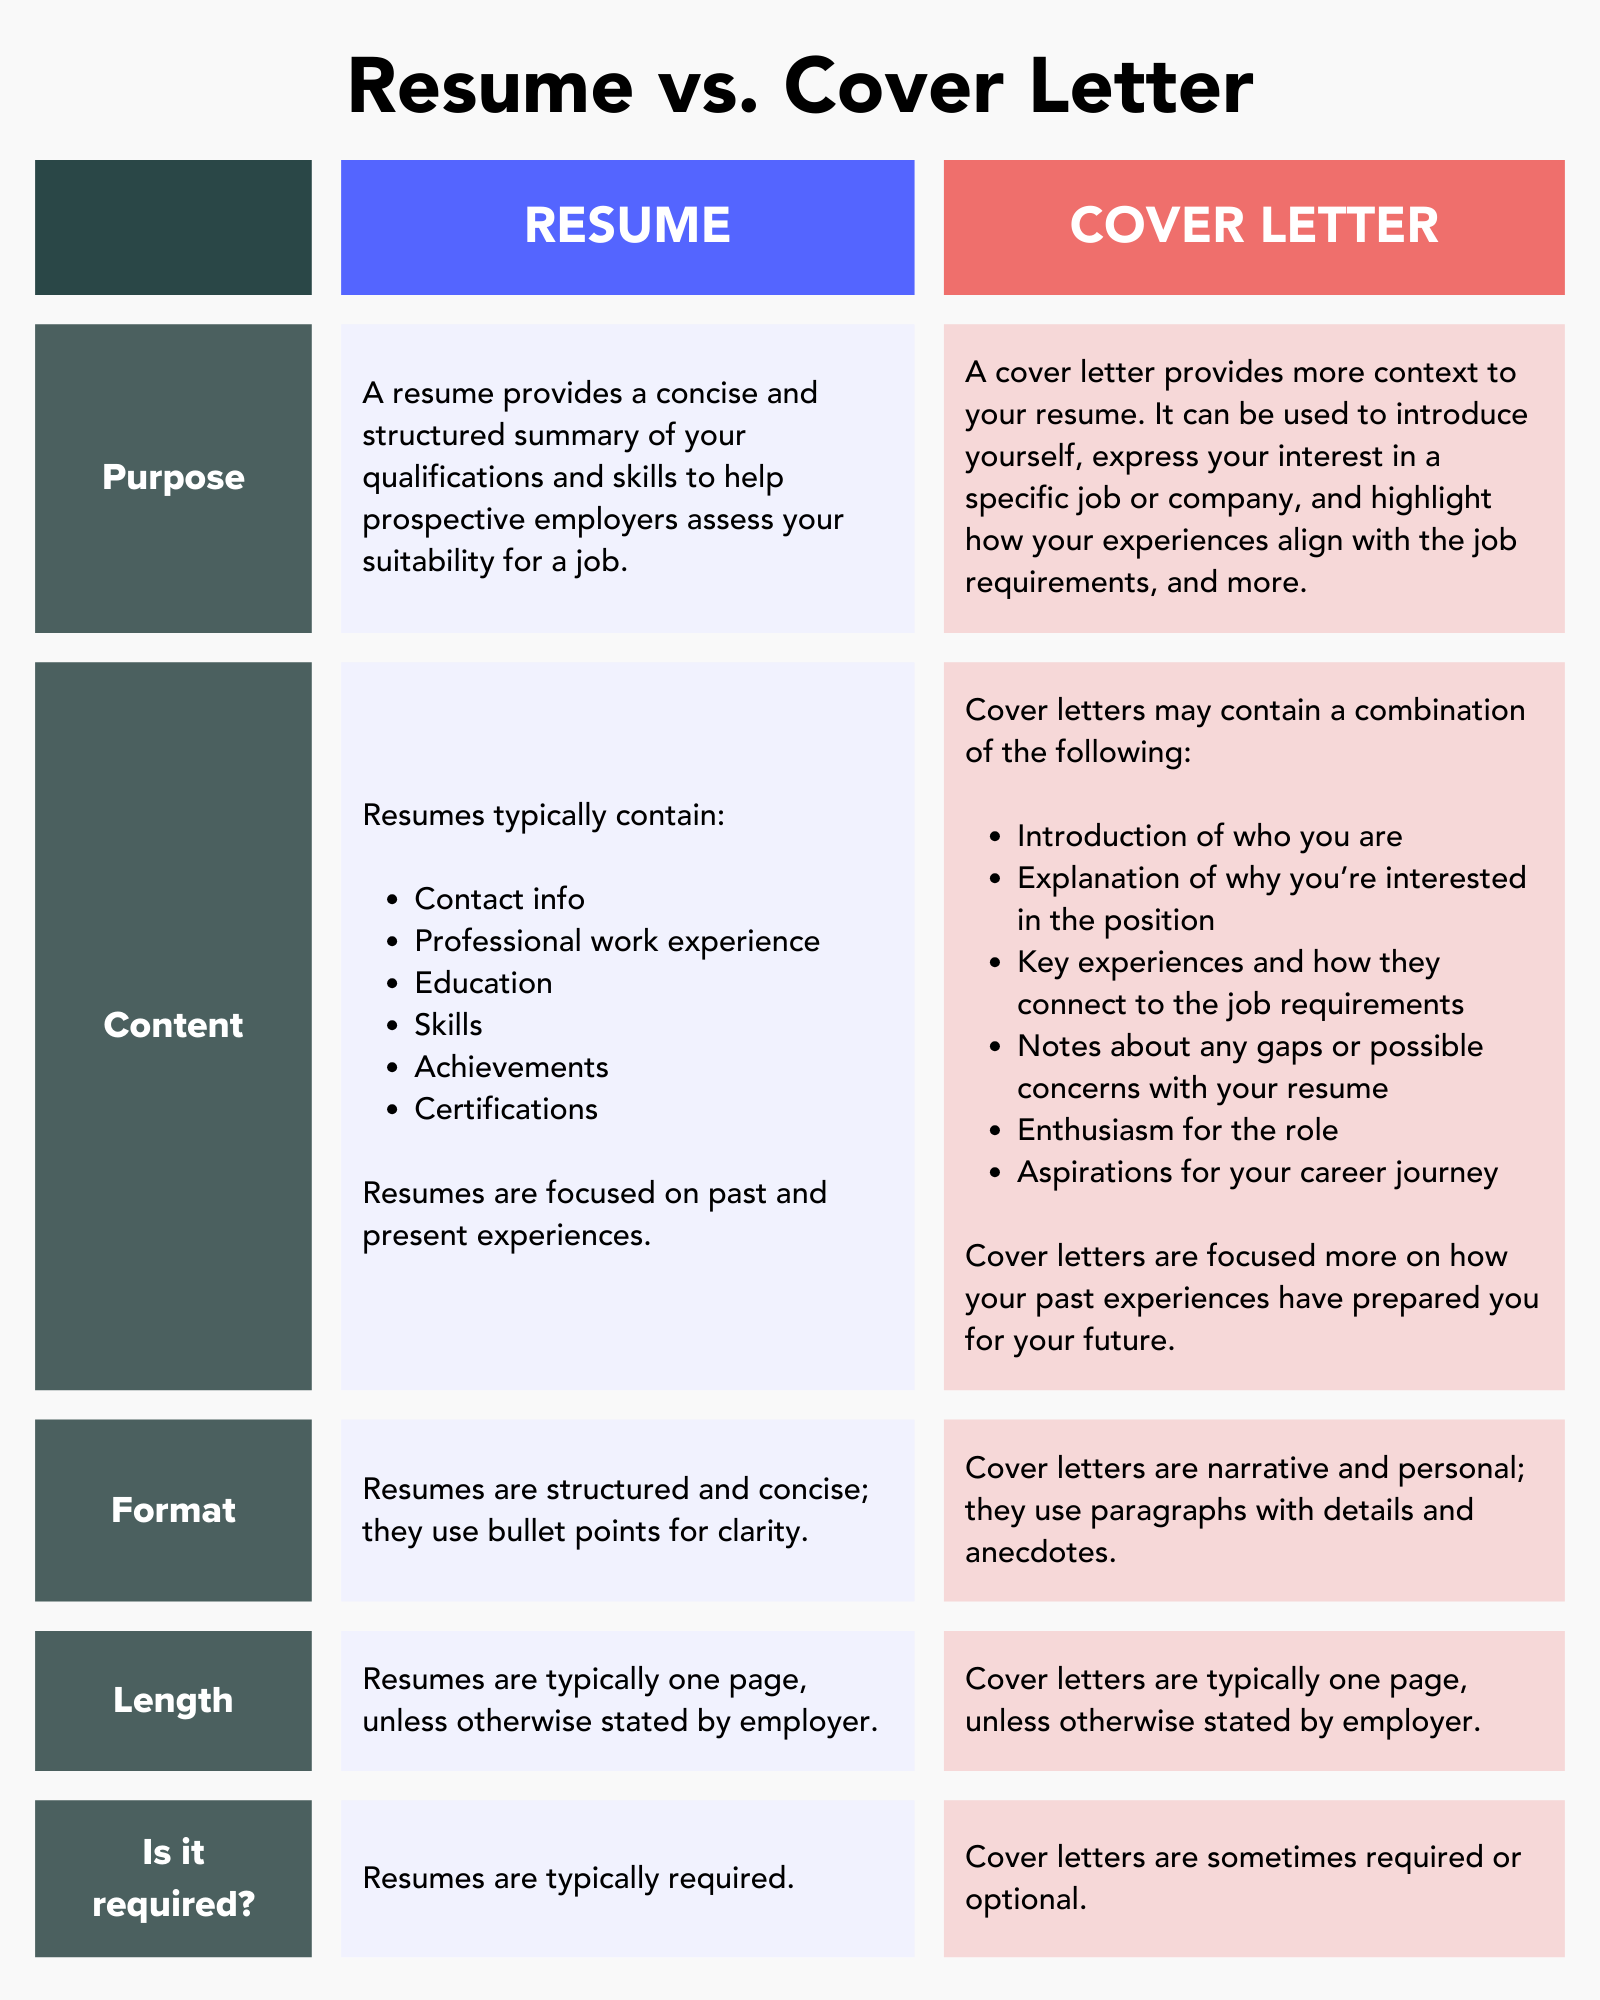 similarities between cover letter and resume